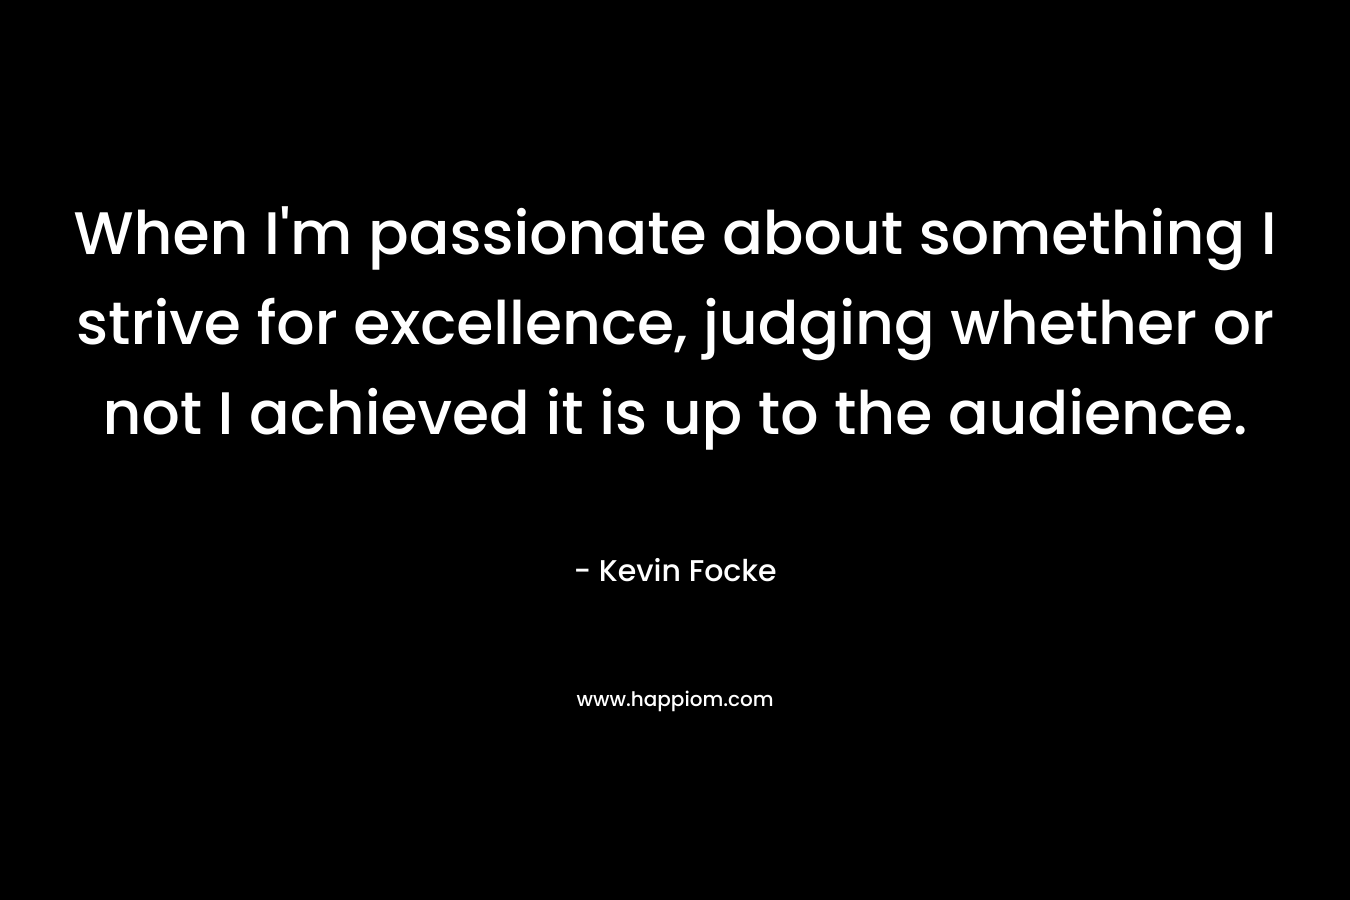 When I’m passionate about something I strive for excellence, judging whether or not I achieved it is up to the audience. – Kevin Focke